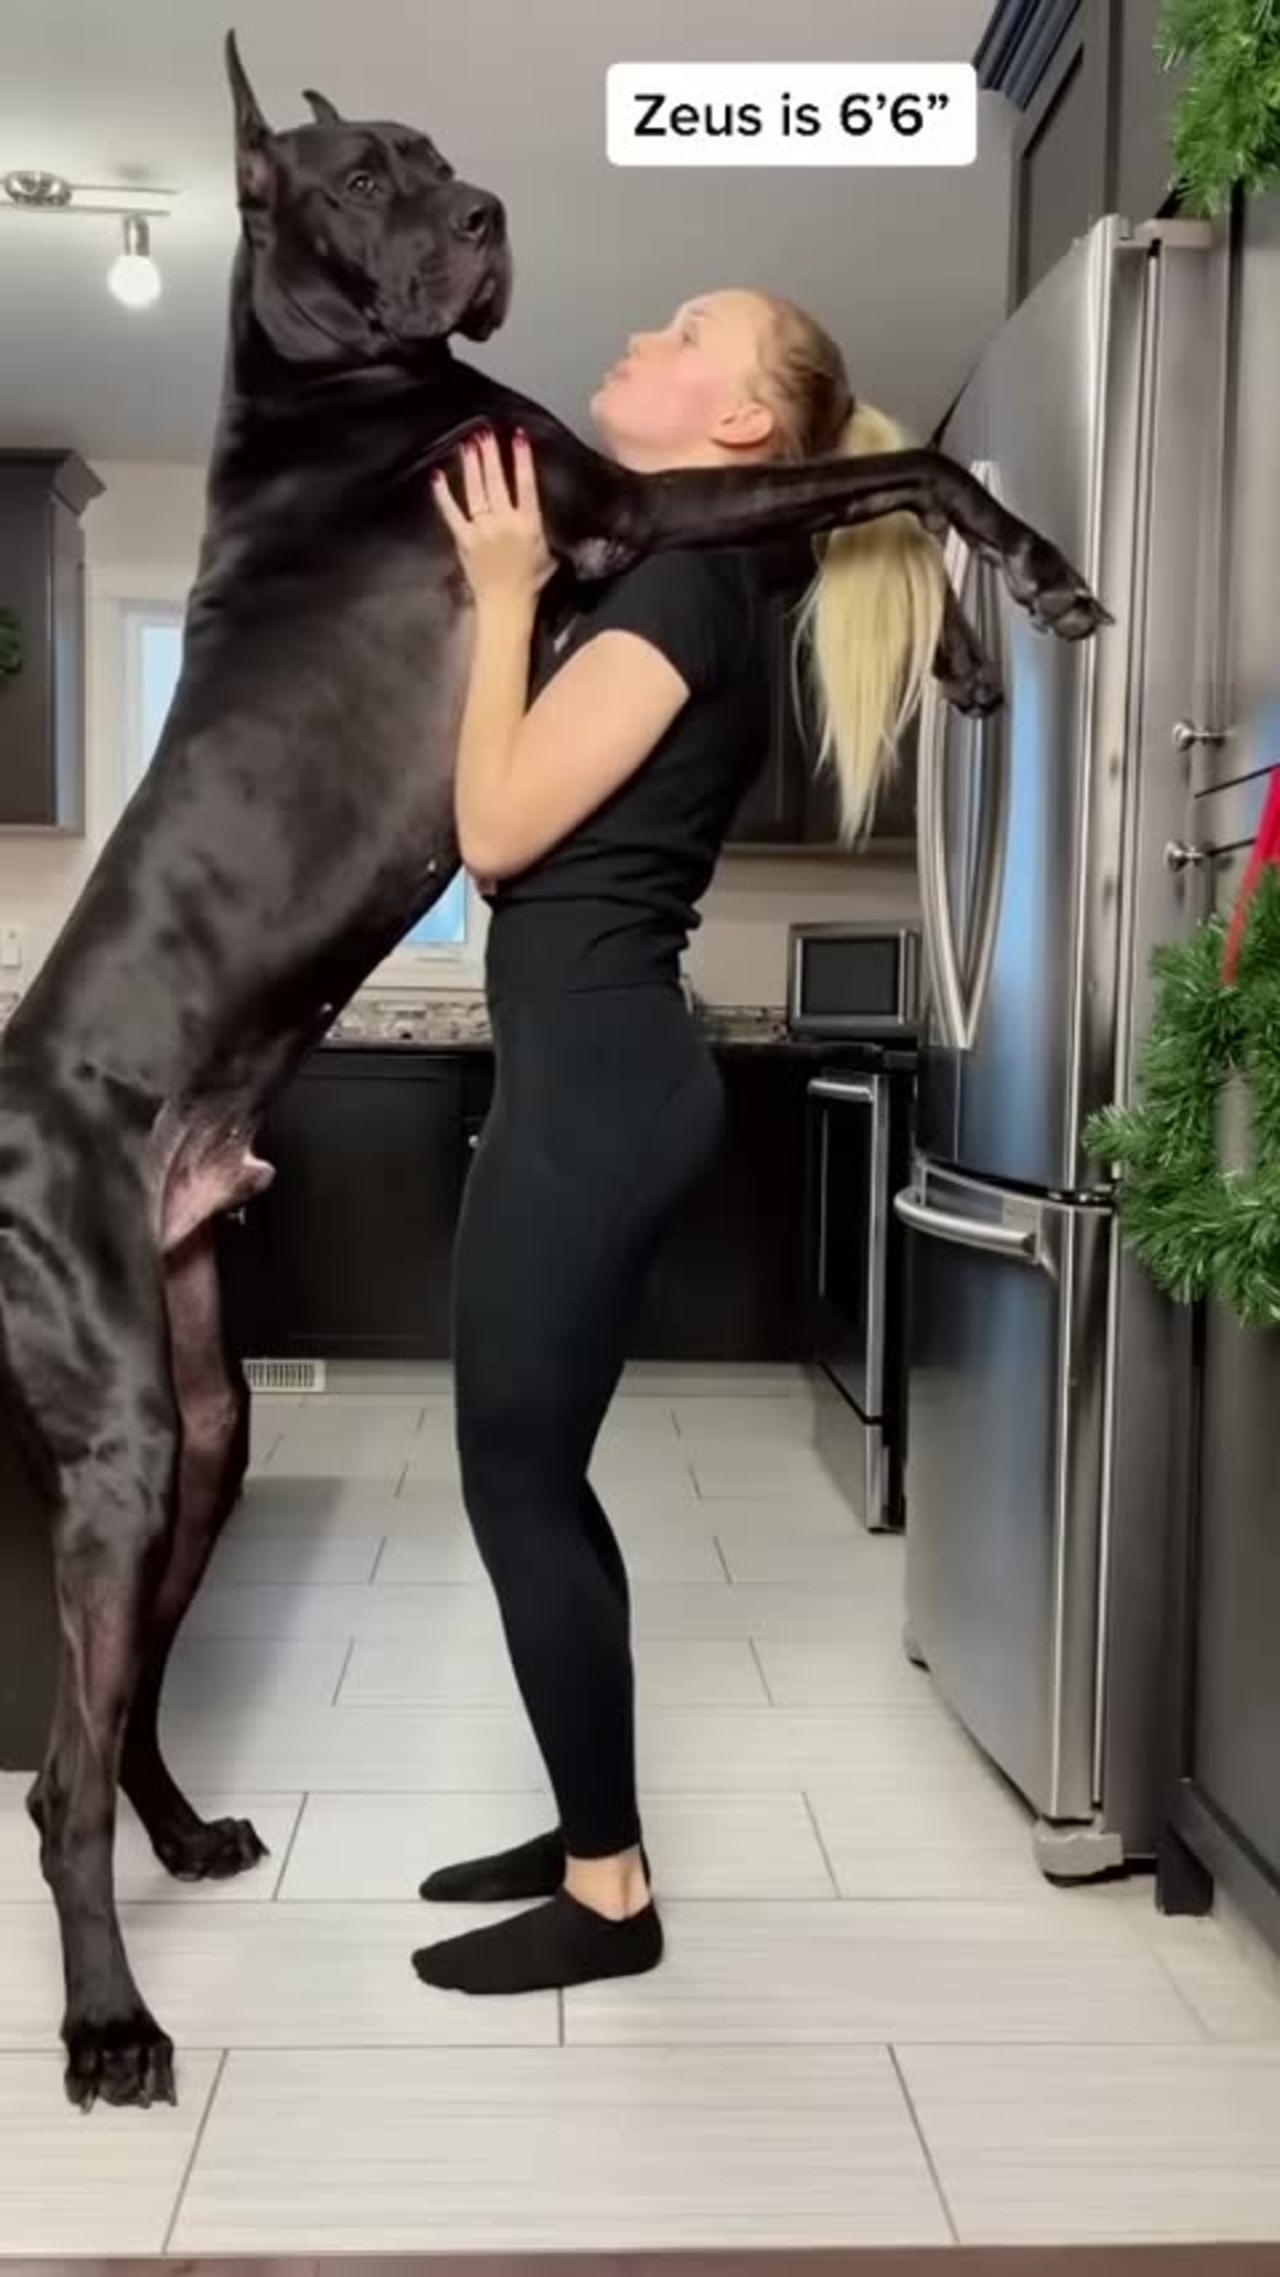 Great Dane is Taller Than Human and well train